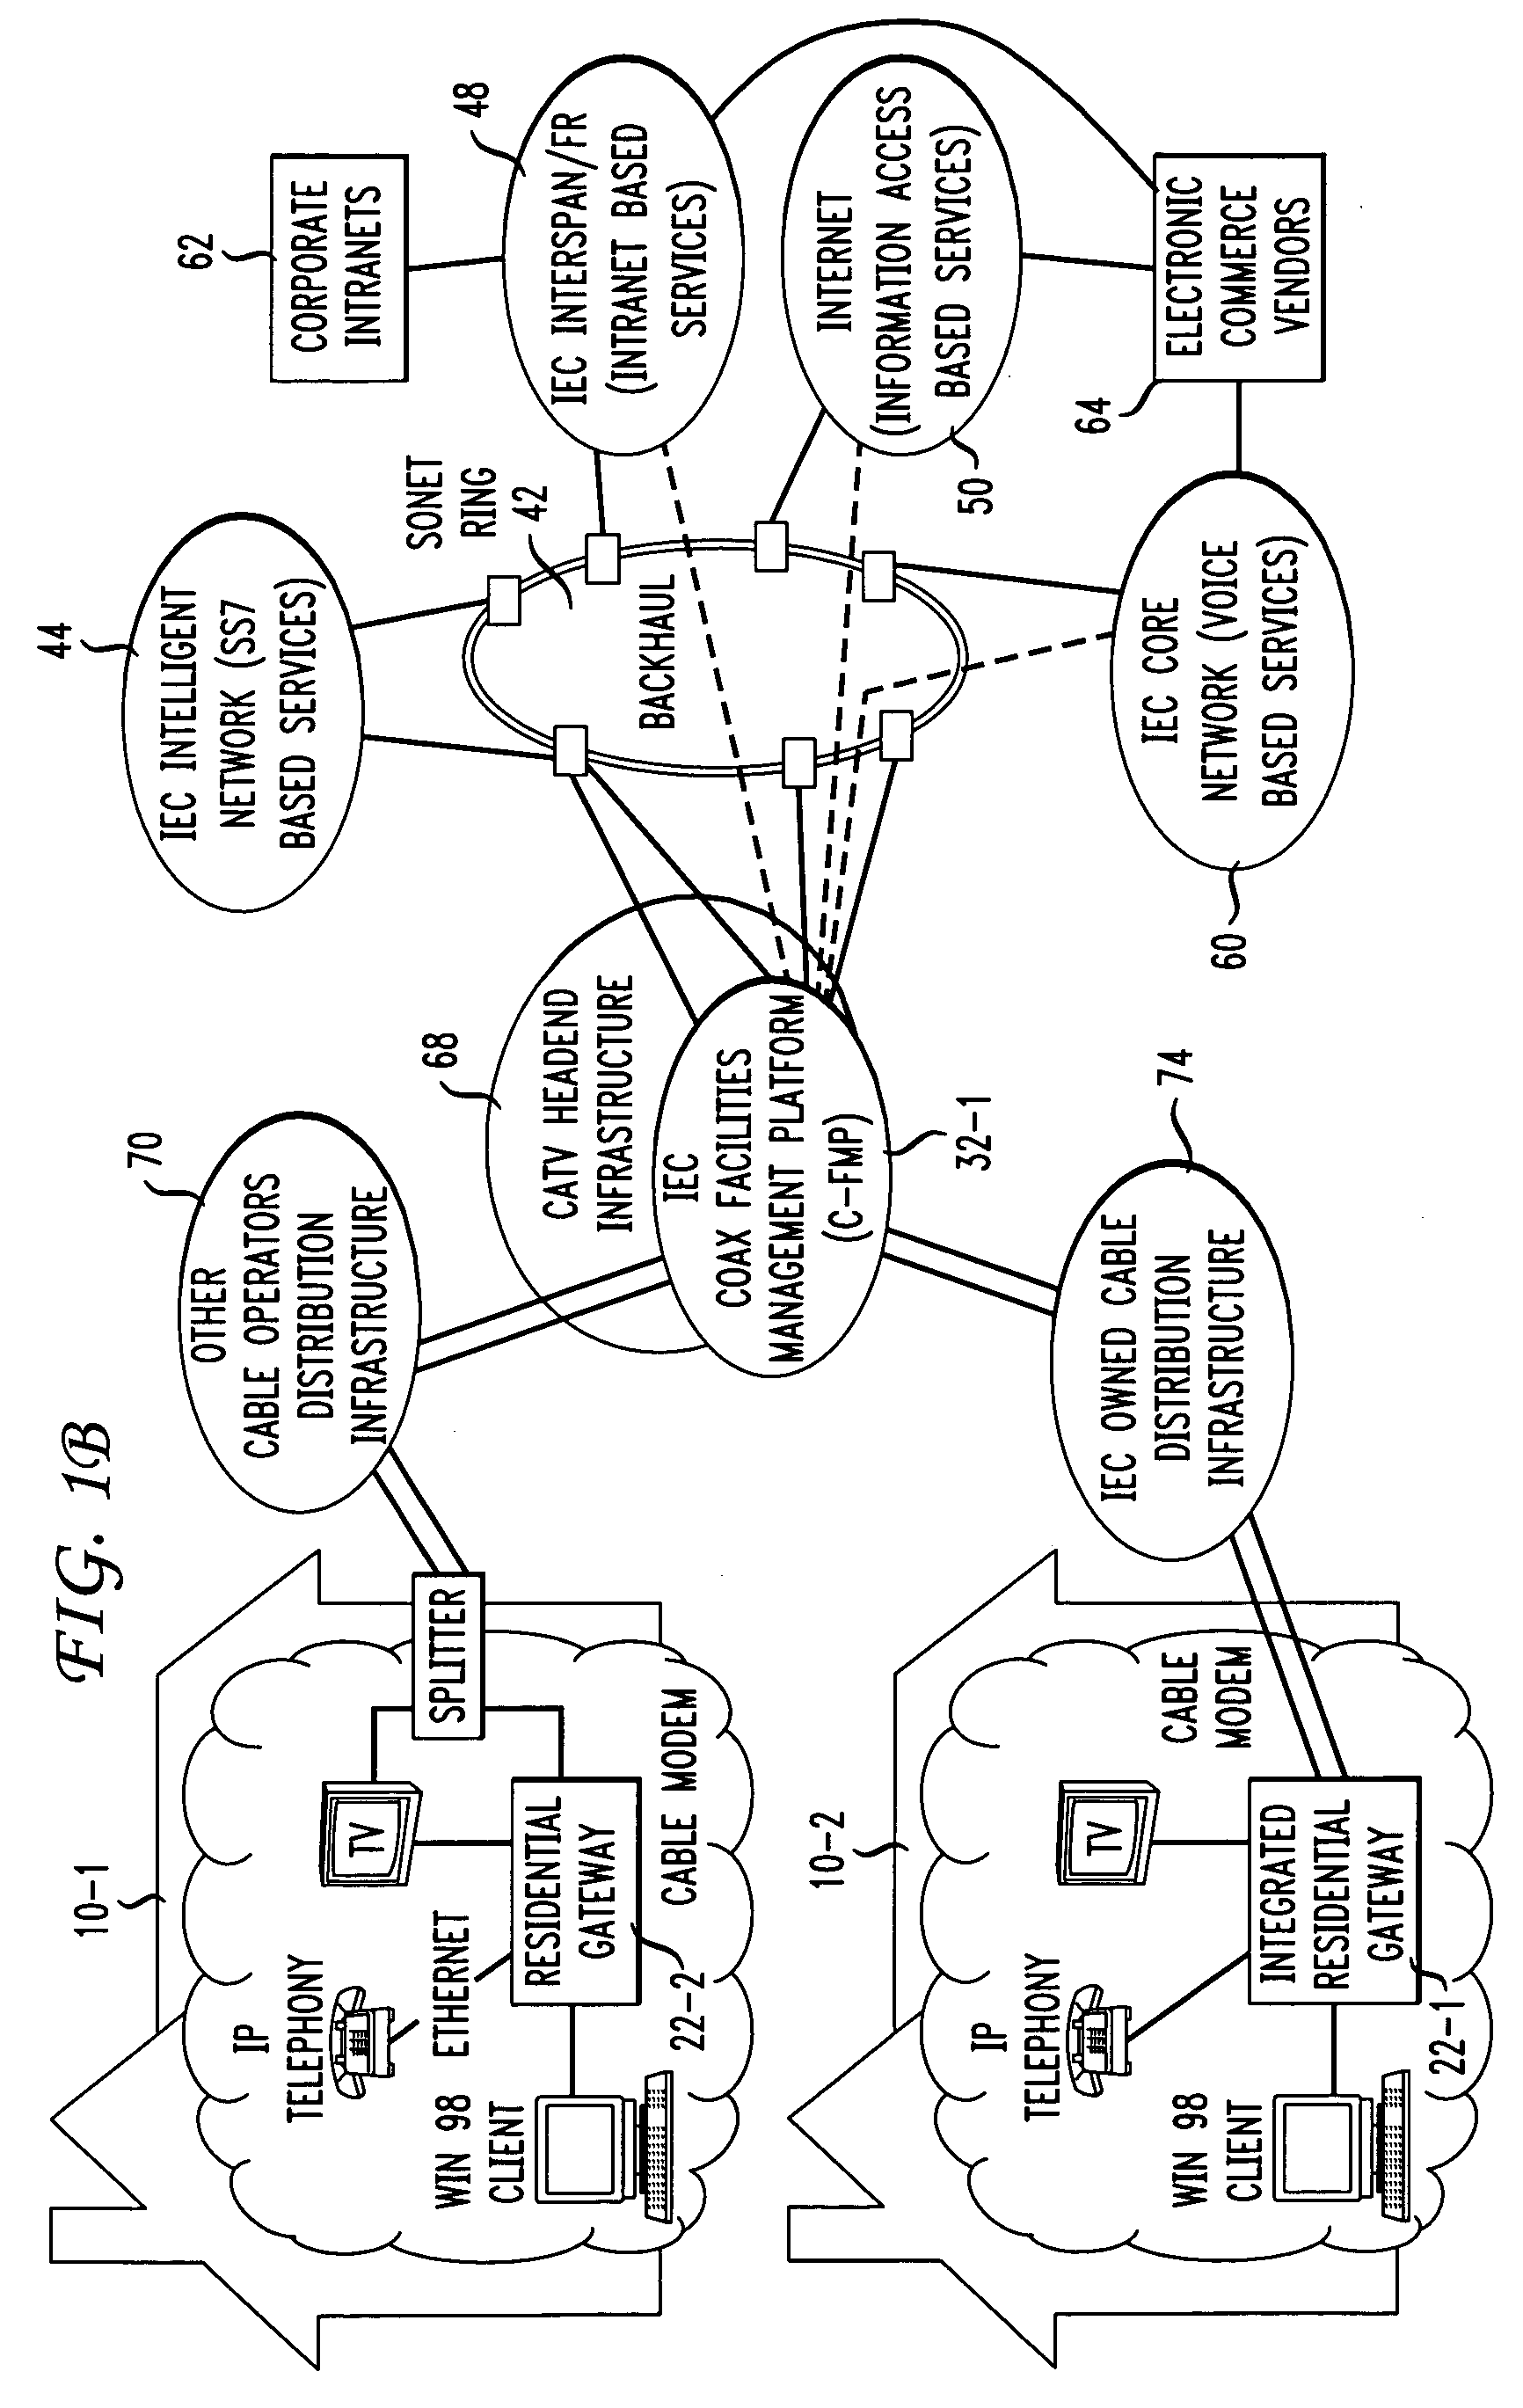 Facility management platform for a hybrid coaxial/twisted pair local loop network service architecture